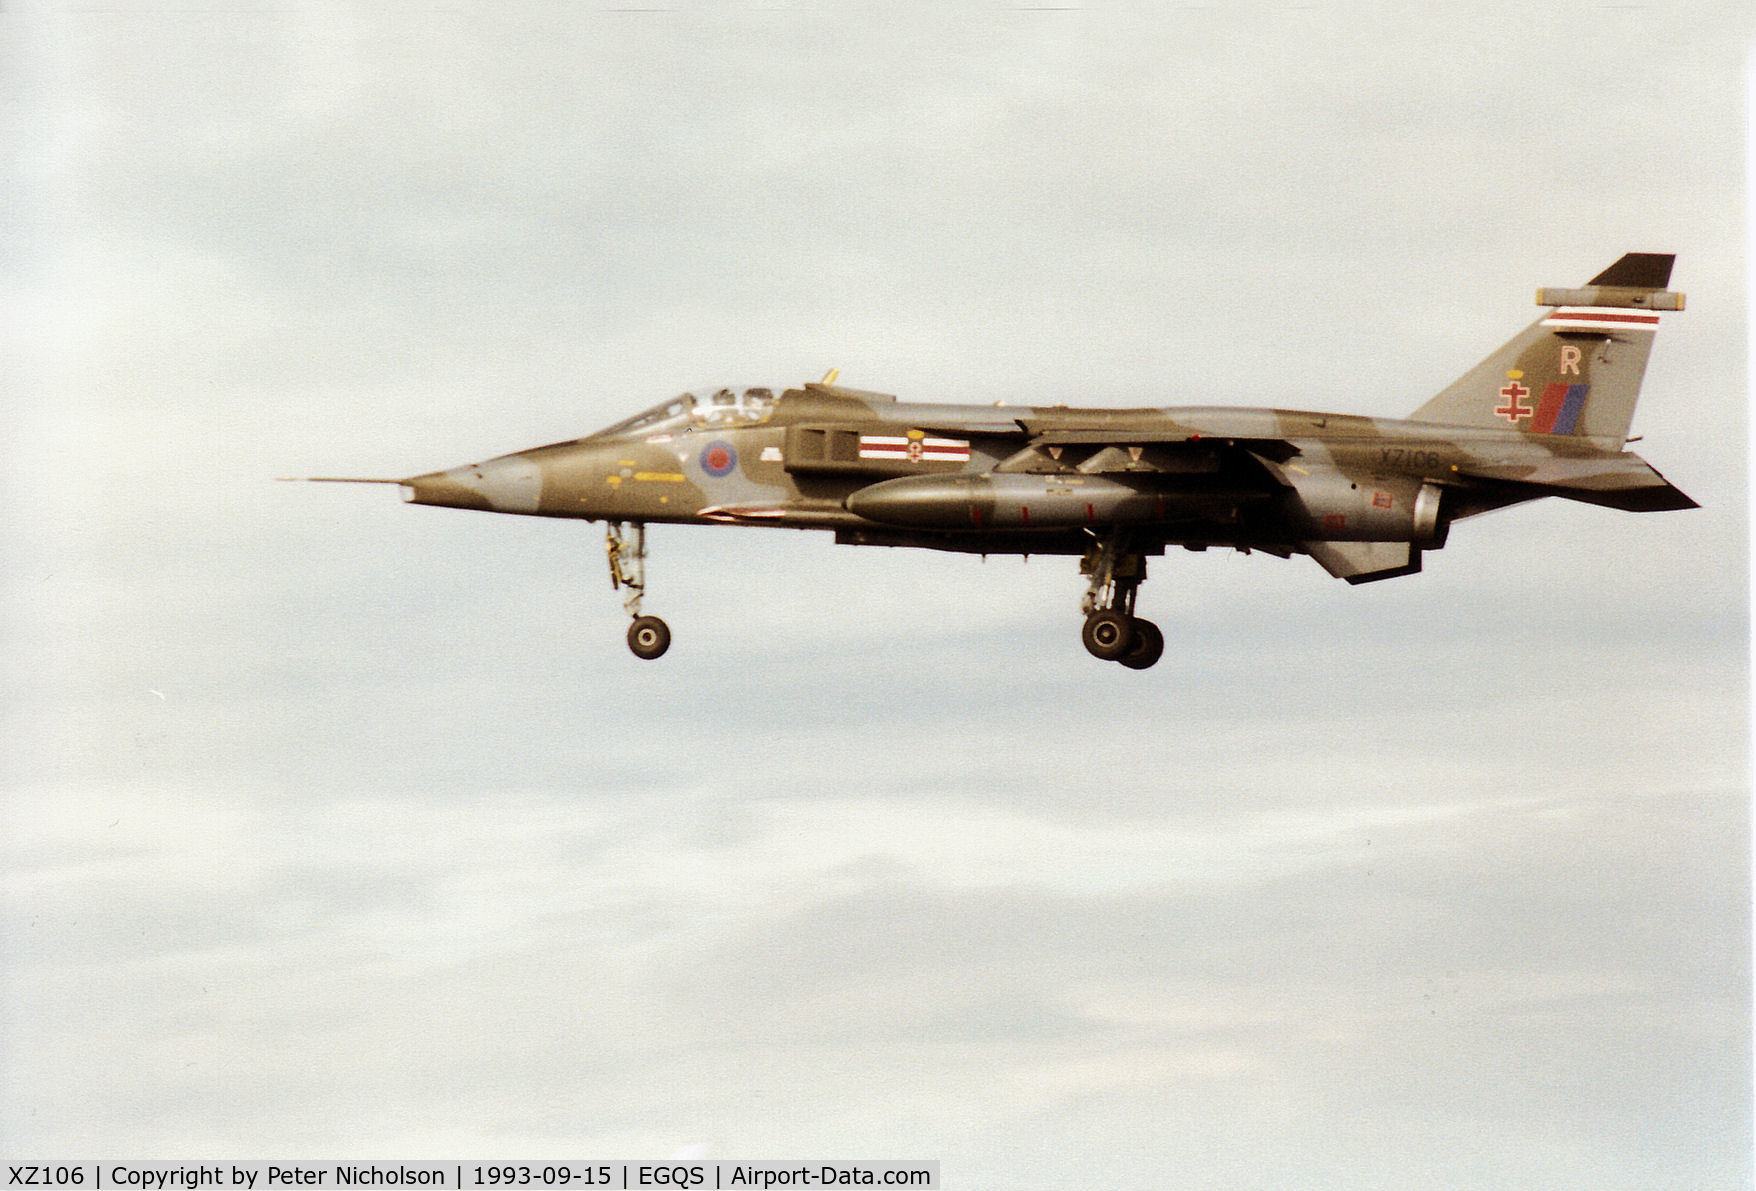 XZ106, 1976 Sepecat Jaguar GR.1A C/N S.107, Jaguar GR.1A of 41 Squadron at RAF Coltishall on final approach to Runway 23 at RAF Lossiemouth in September 1993.